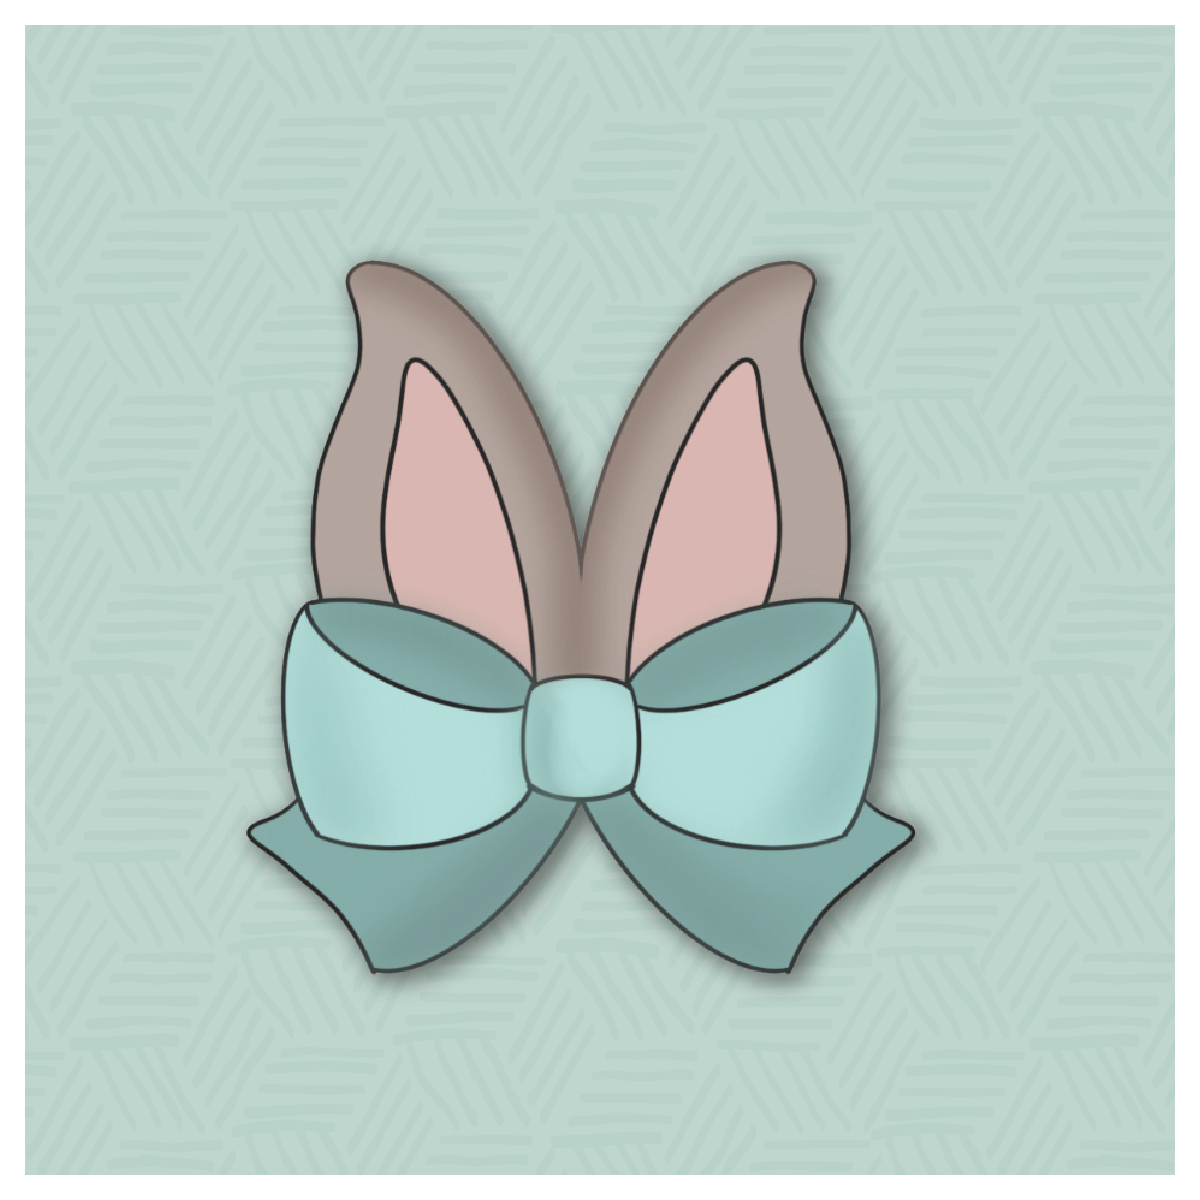 Bow Bunny Ears Cookie Cutter by Minnie Cakes